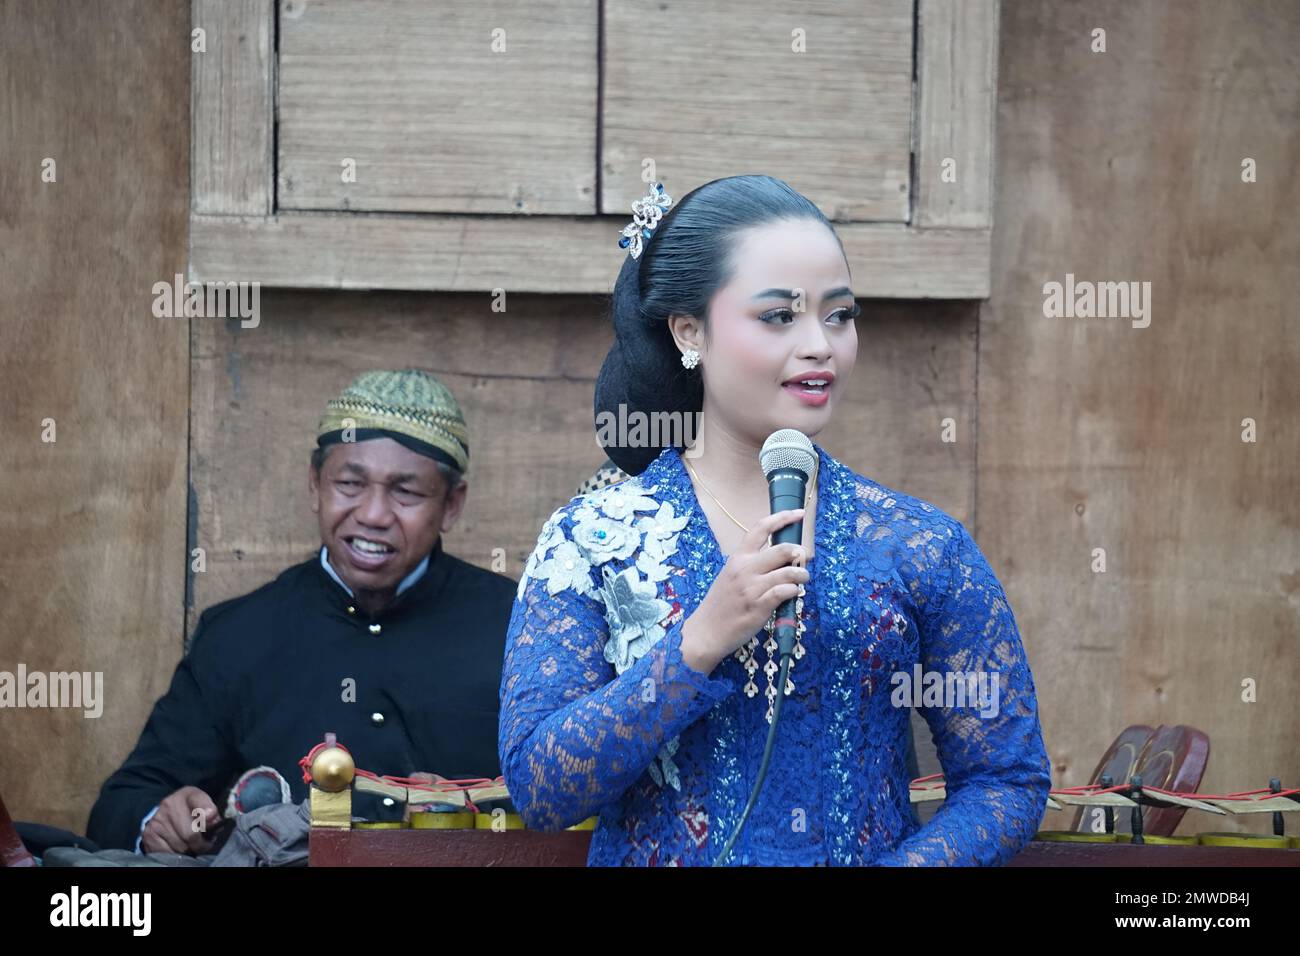 The sinden (Javanese singer traditional song) on Blitar Jadul. Blitar jadul was held for the anniversary of the city of Blitar Stock Photo